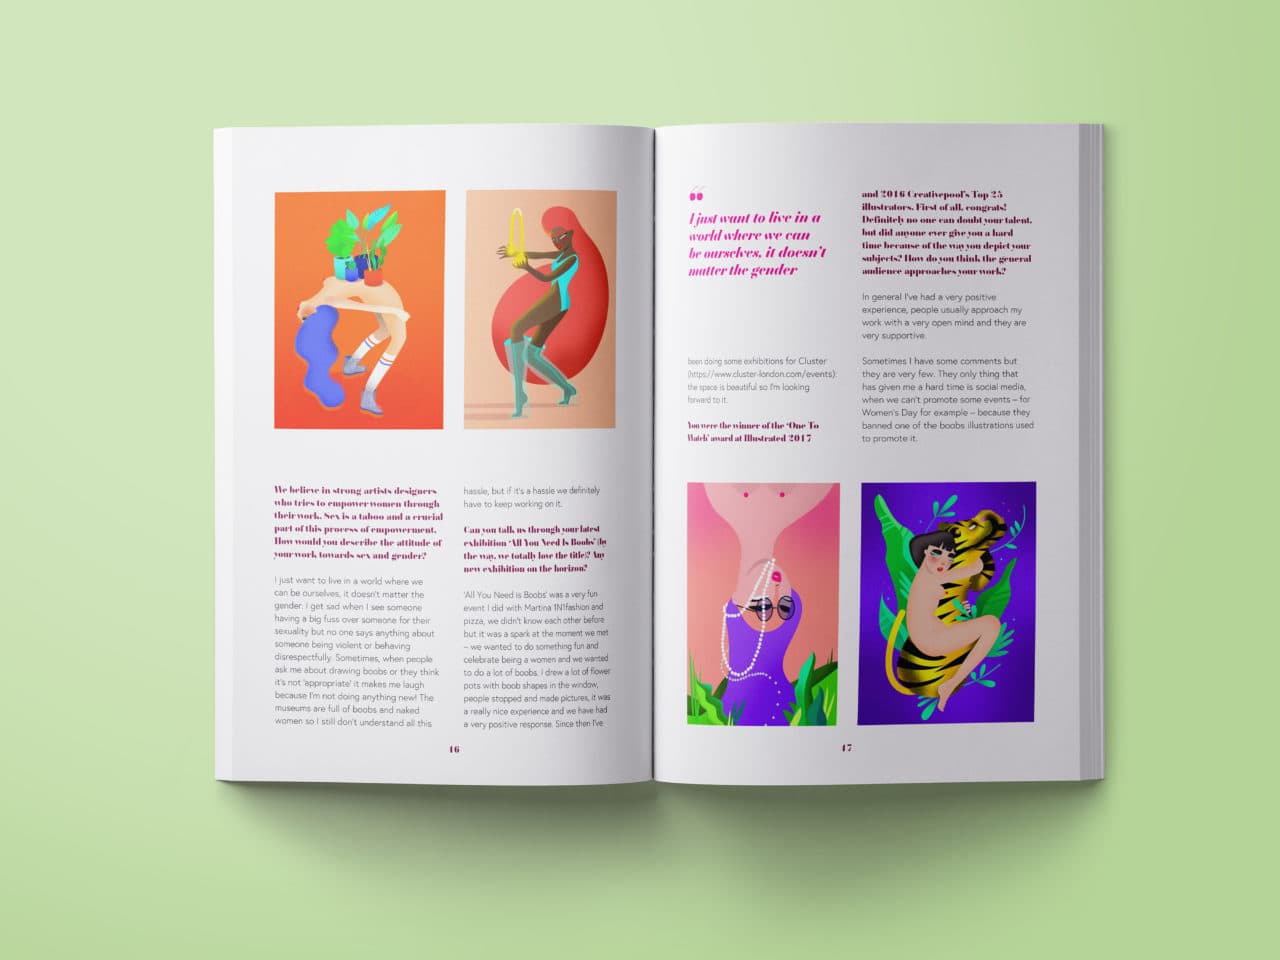 Some pages of Vagina-nomics including text about gender and four illustrations of women.